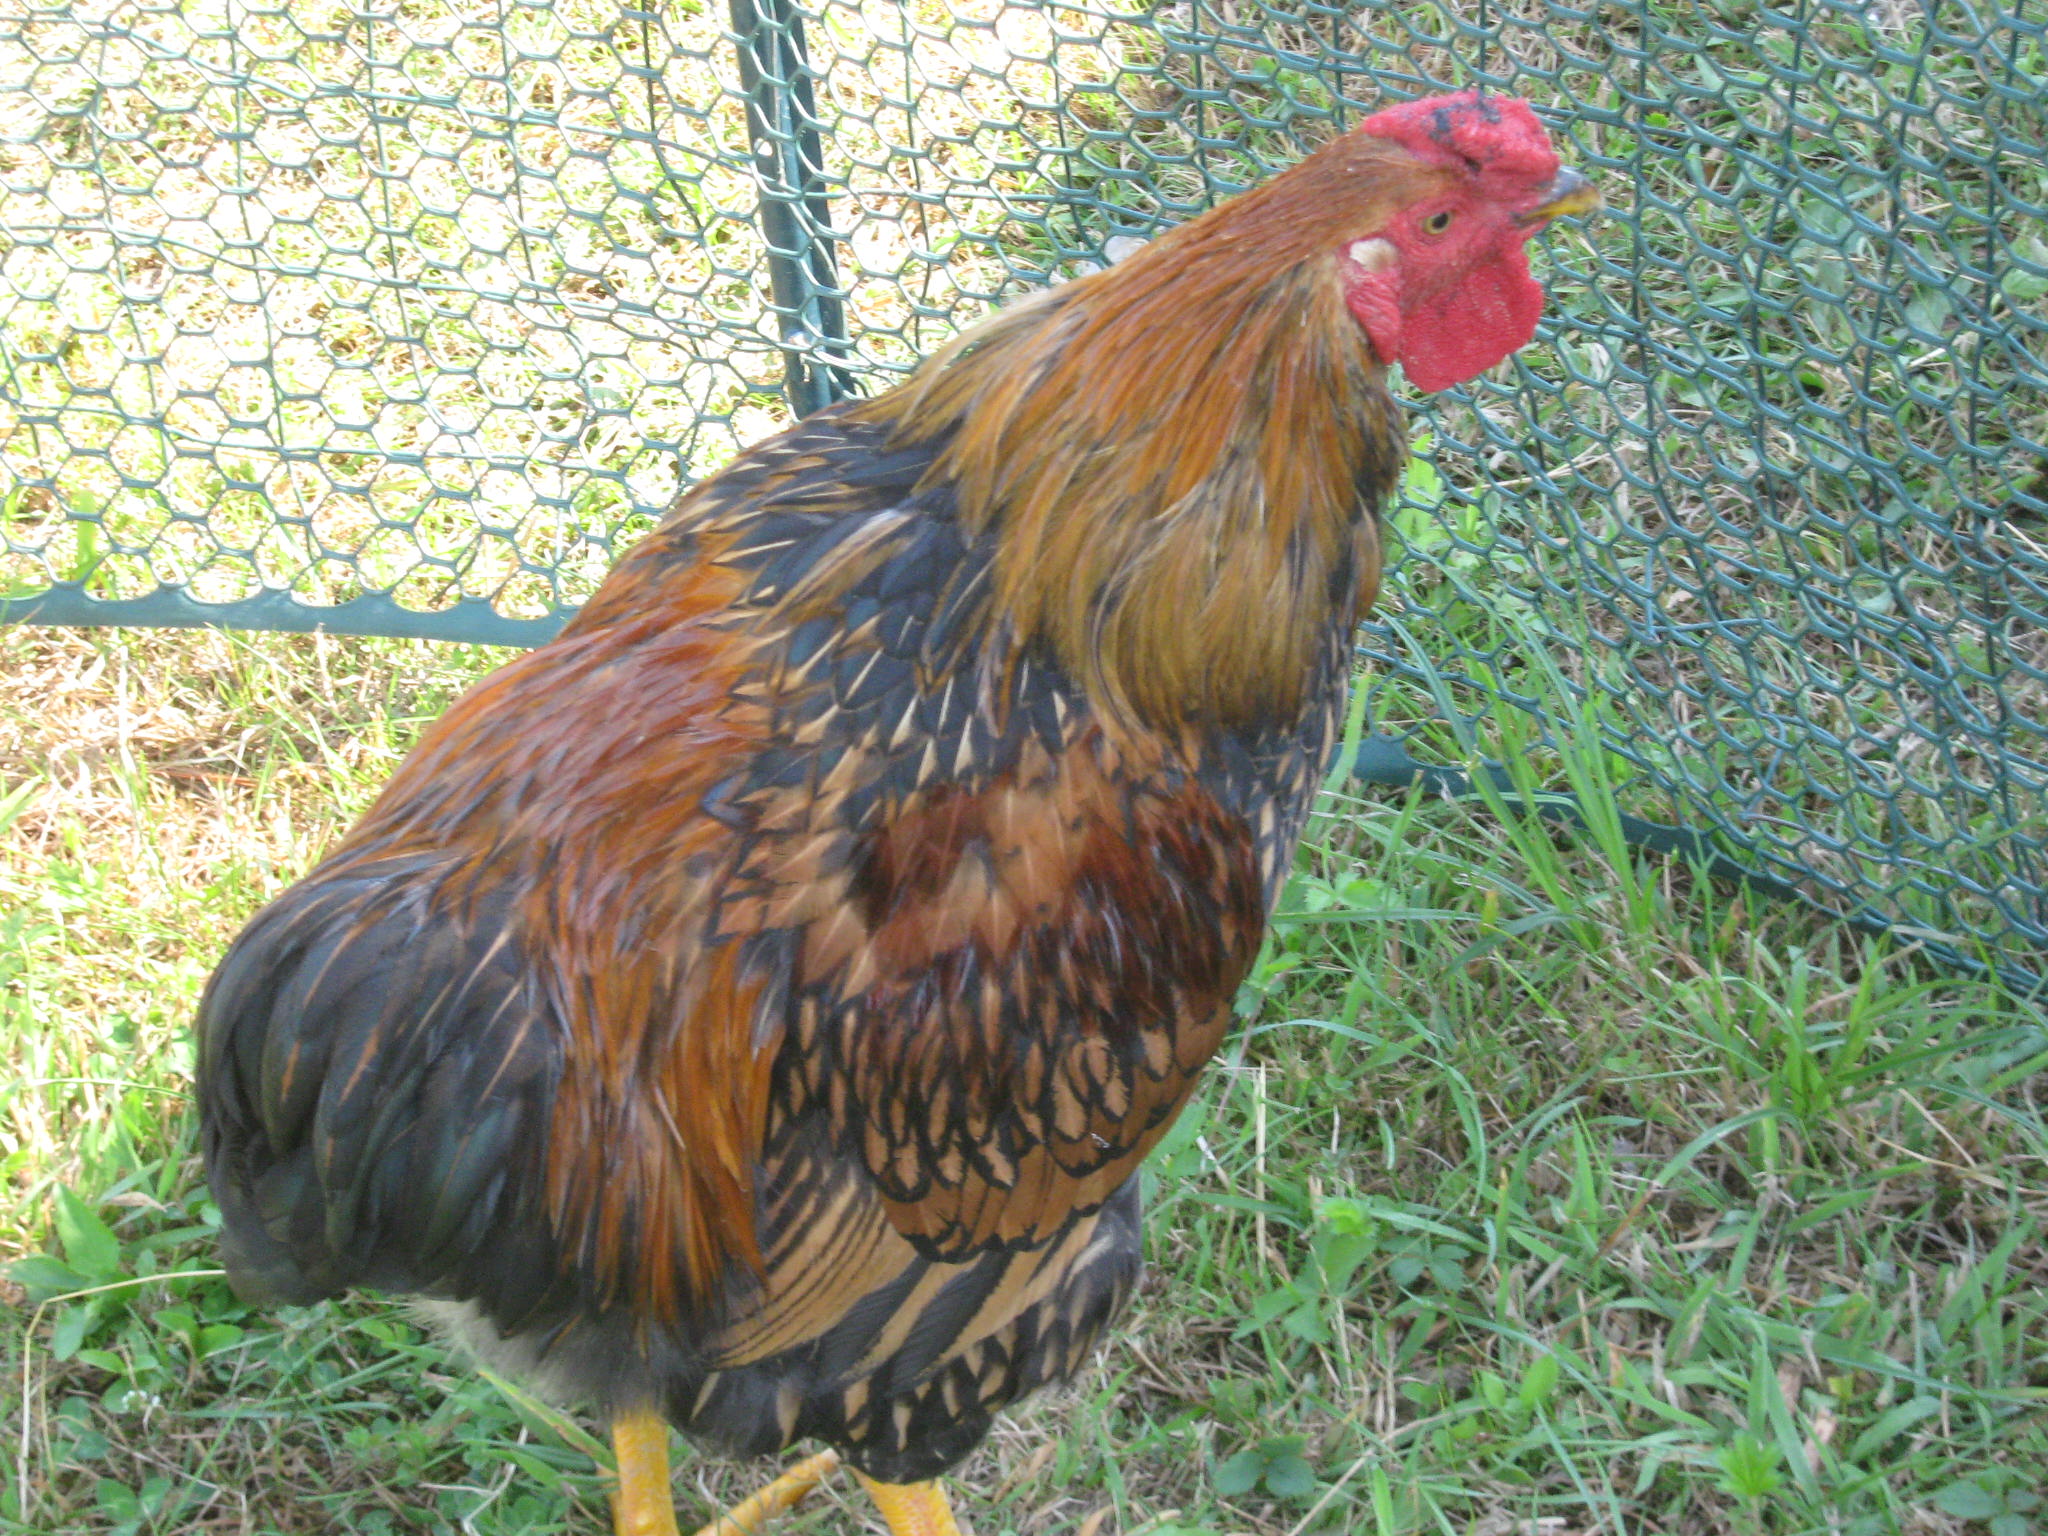 our favorite rooster Jager, because he has moves like Jager, he does little dances!